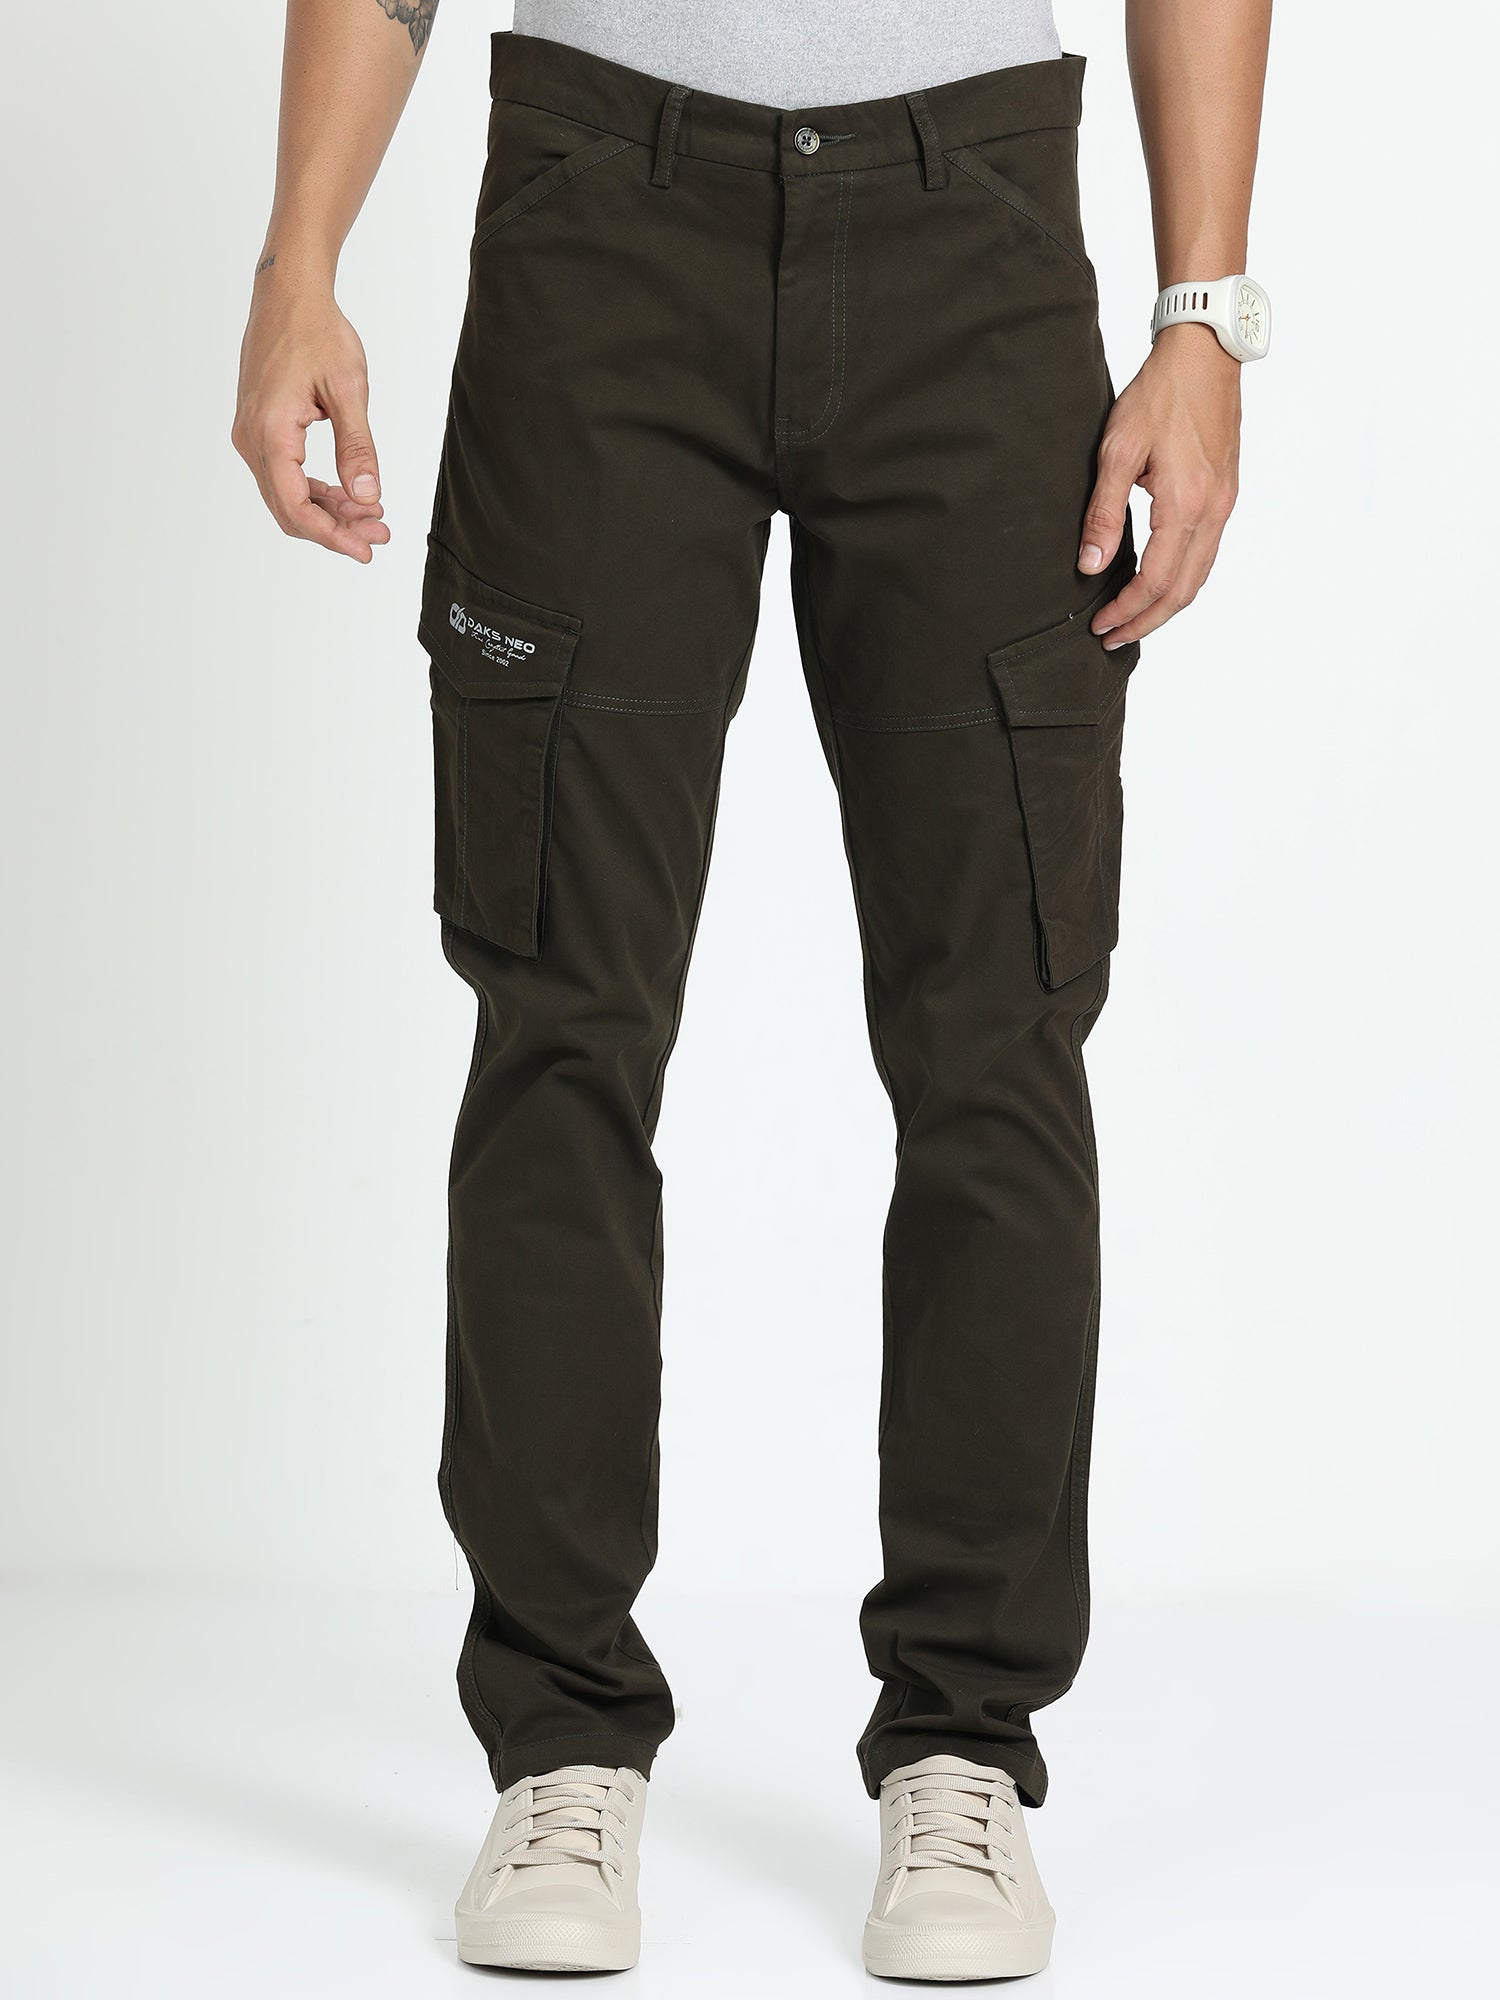 Palm Green Cargo Pant for Men 